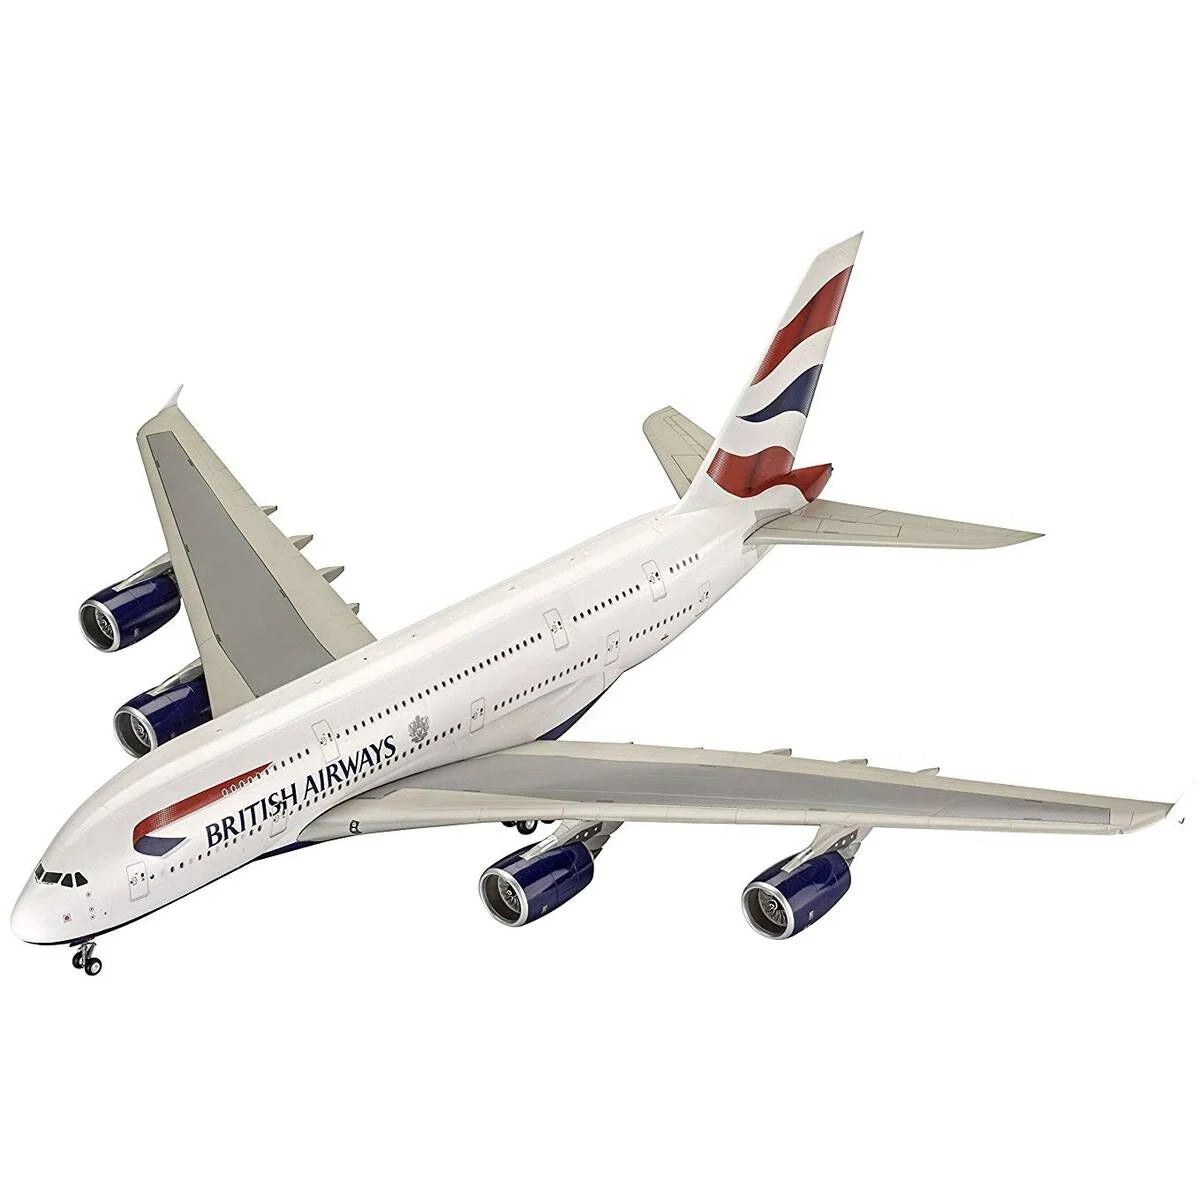 Revell Airbus A380-800 "British Airways" (1:144) - Loaded Dice Barry Vale of Glamorgan CF64 3HD